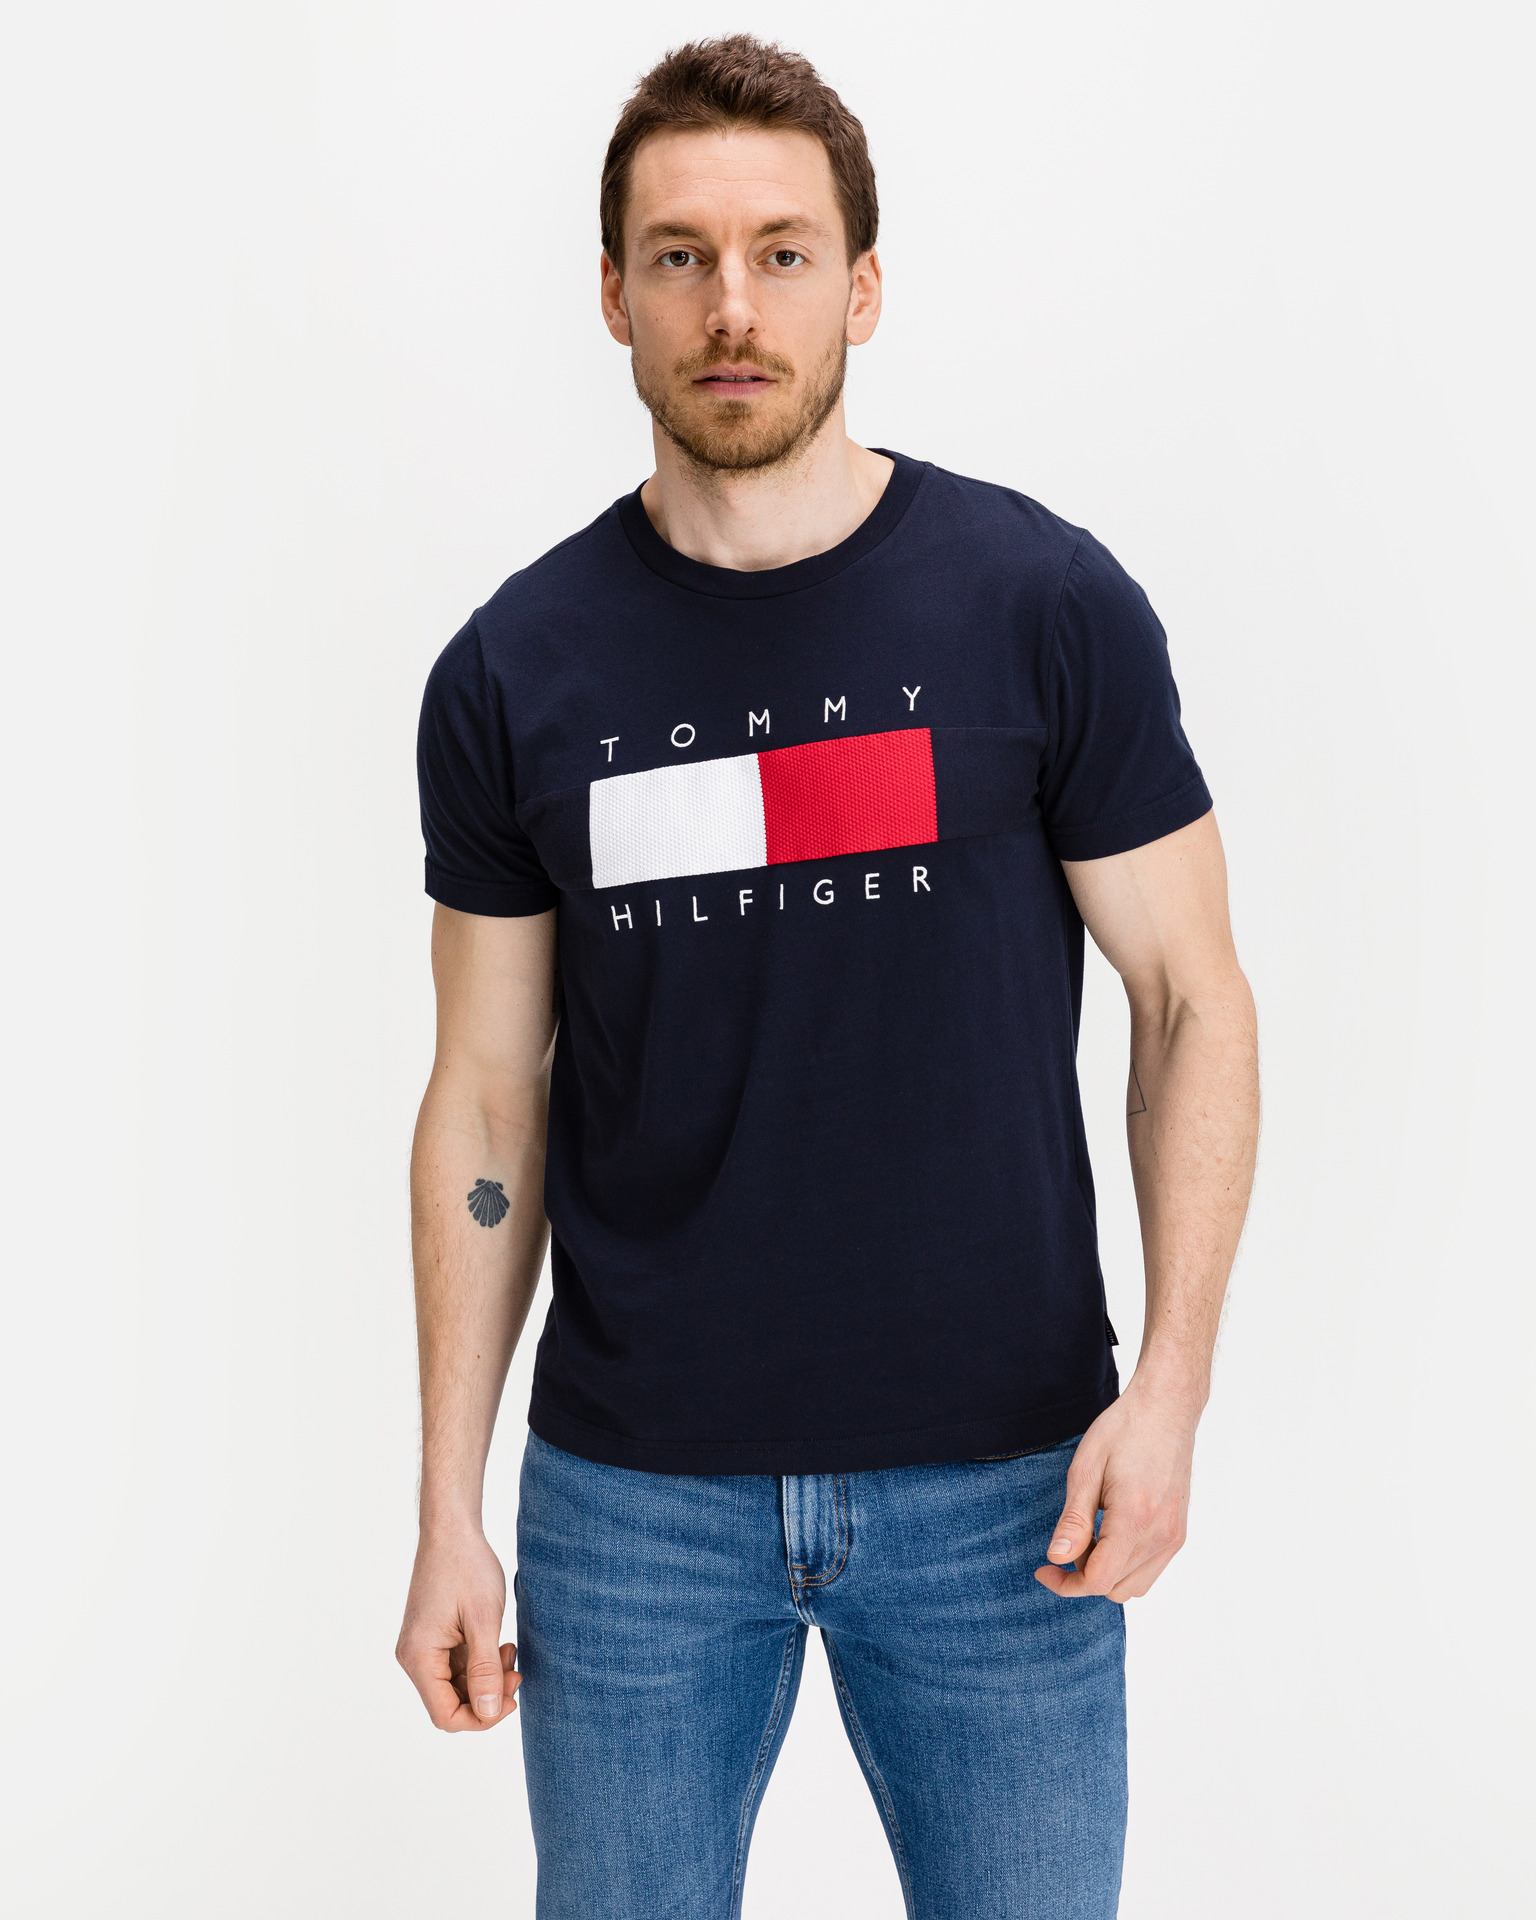 Tommy Hilfiger T-shirt Archives - Tramps the Store